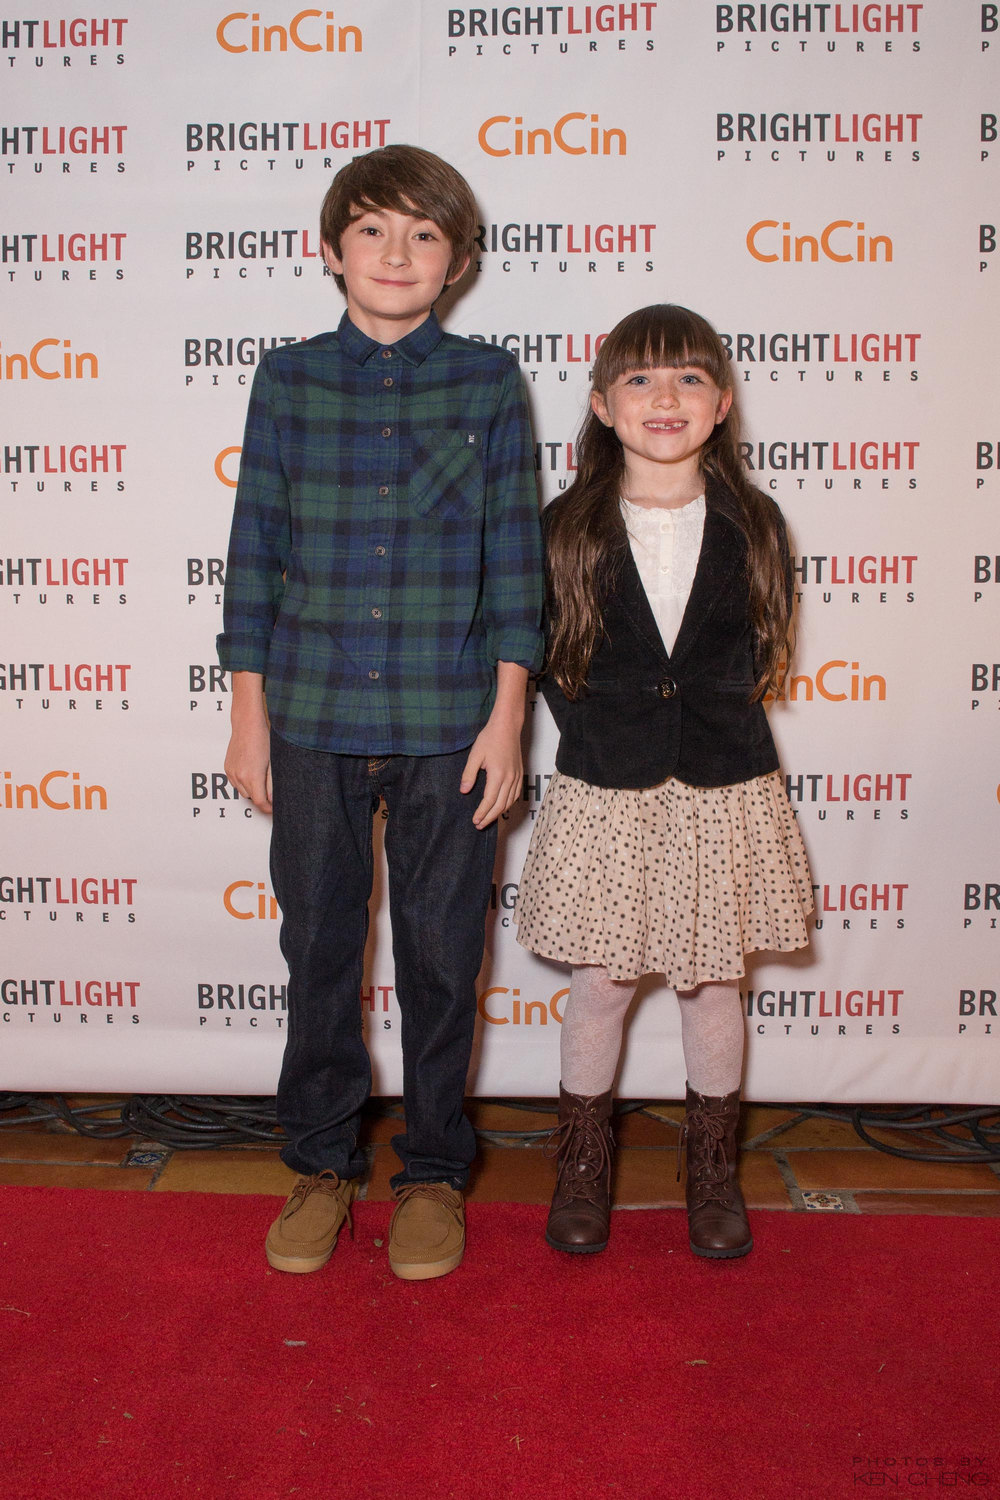 Spencer Drever & Kennedi Clements pose for photographers on the red carpet at Brightlight Pictures' annual Vancouver International Film Festival (2014).